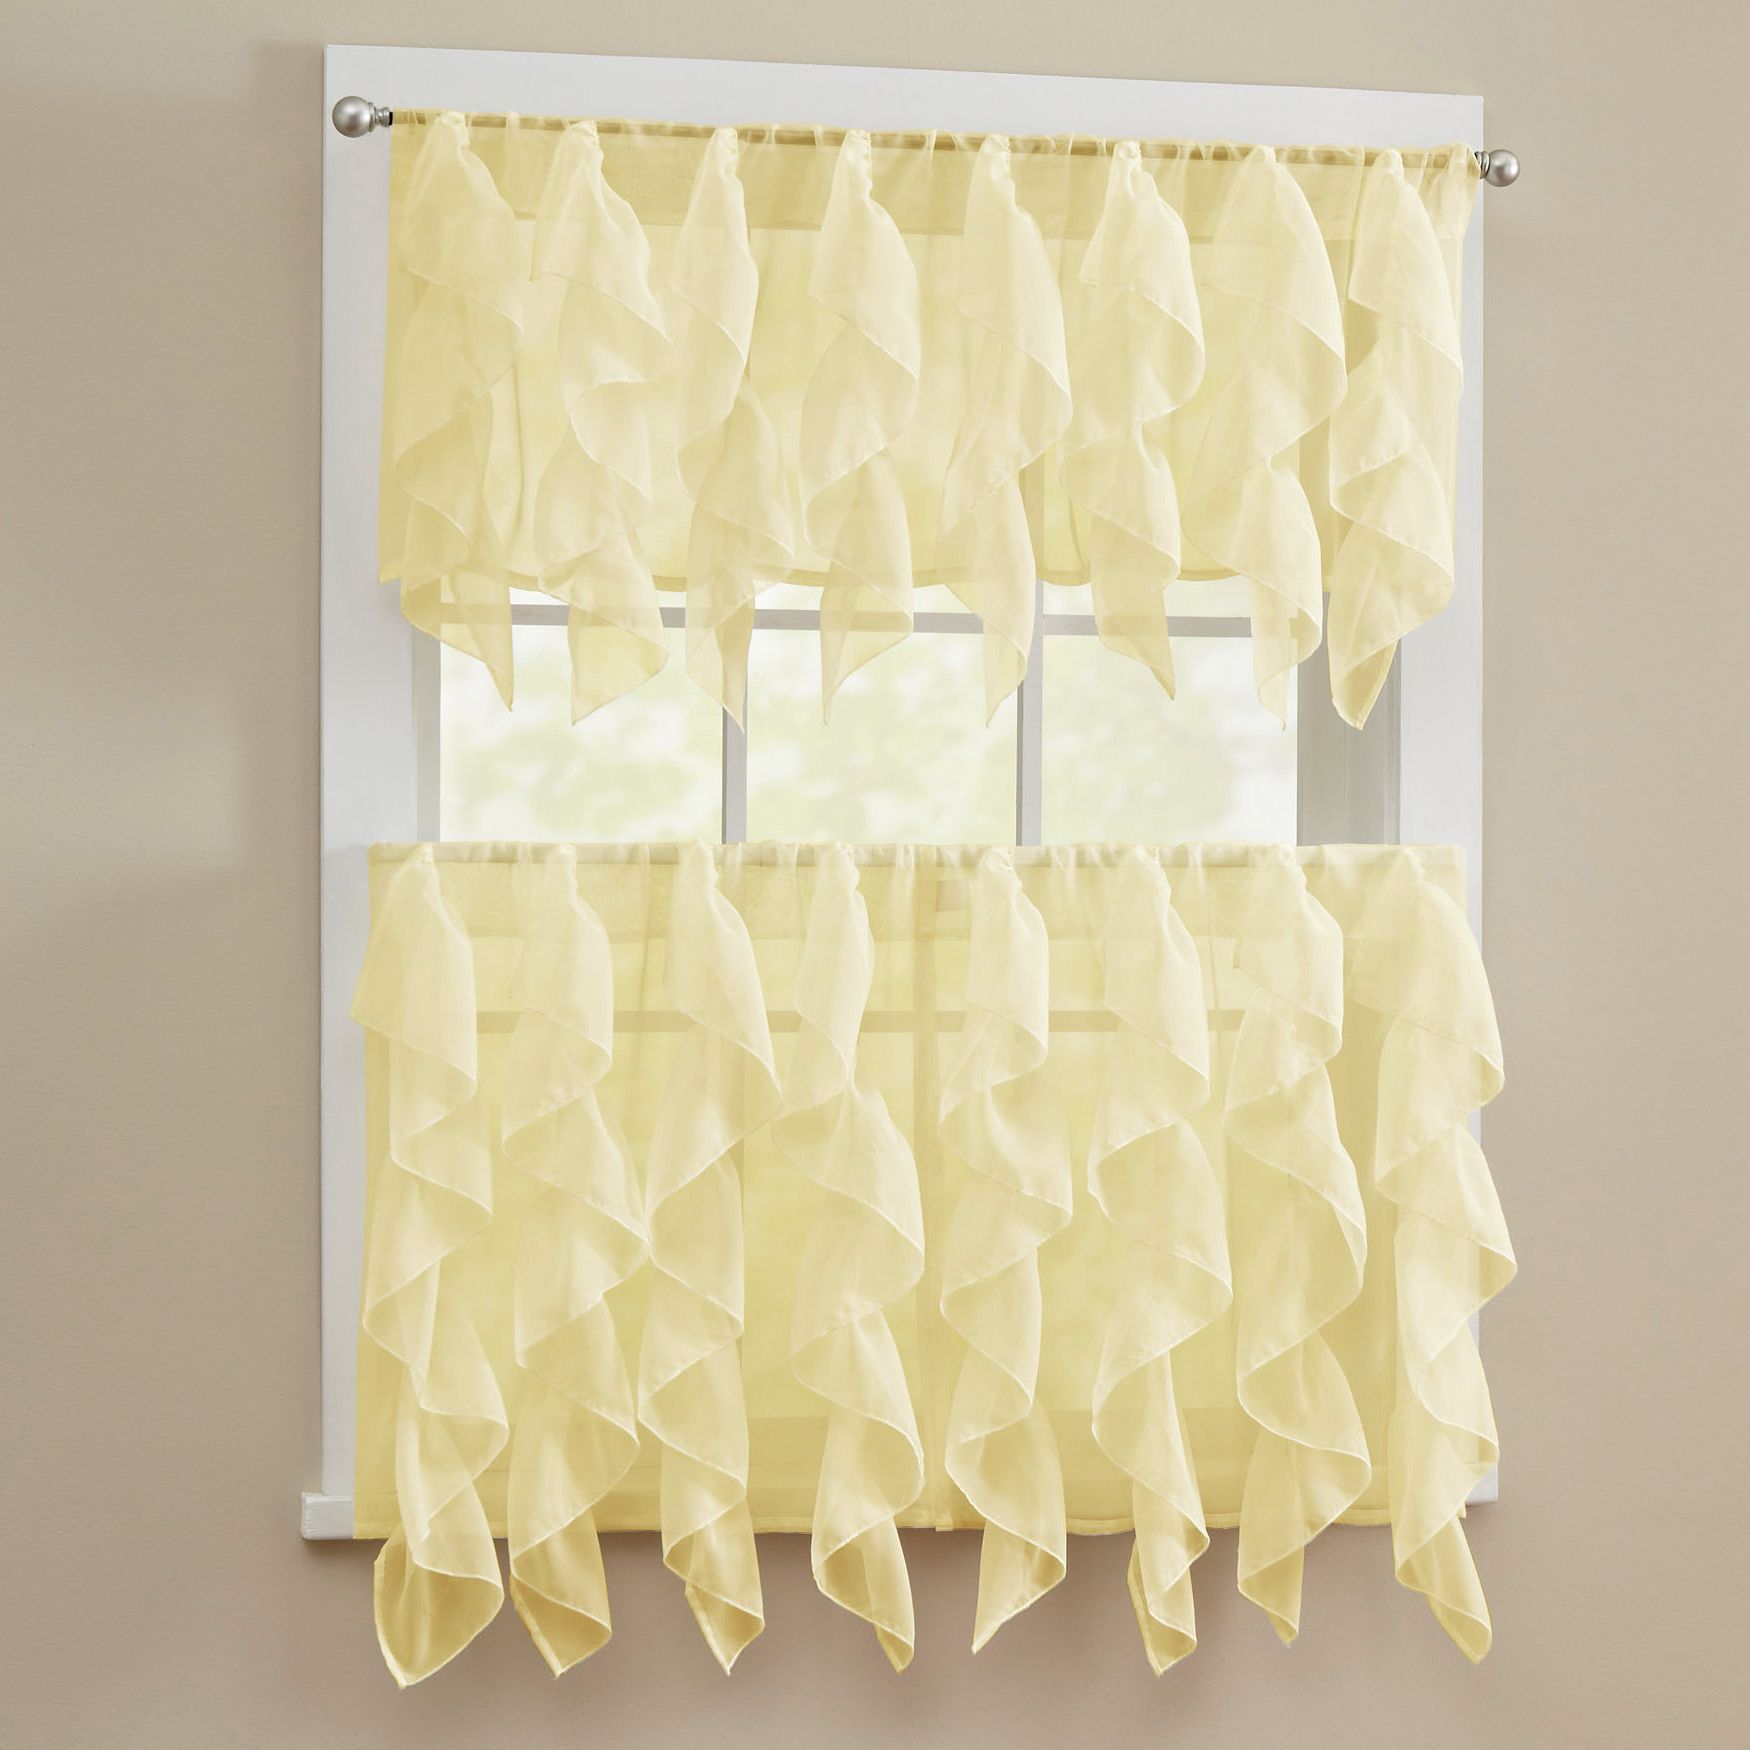 Details About Sheer Voile Vertical Ruffle Window Kitchen Curtain Tiers Or  Valance Maize Throughout Luxurious Kitchen Curtains Tiers, Shade Or Valances (View 15 of 20)